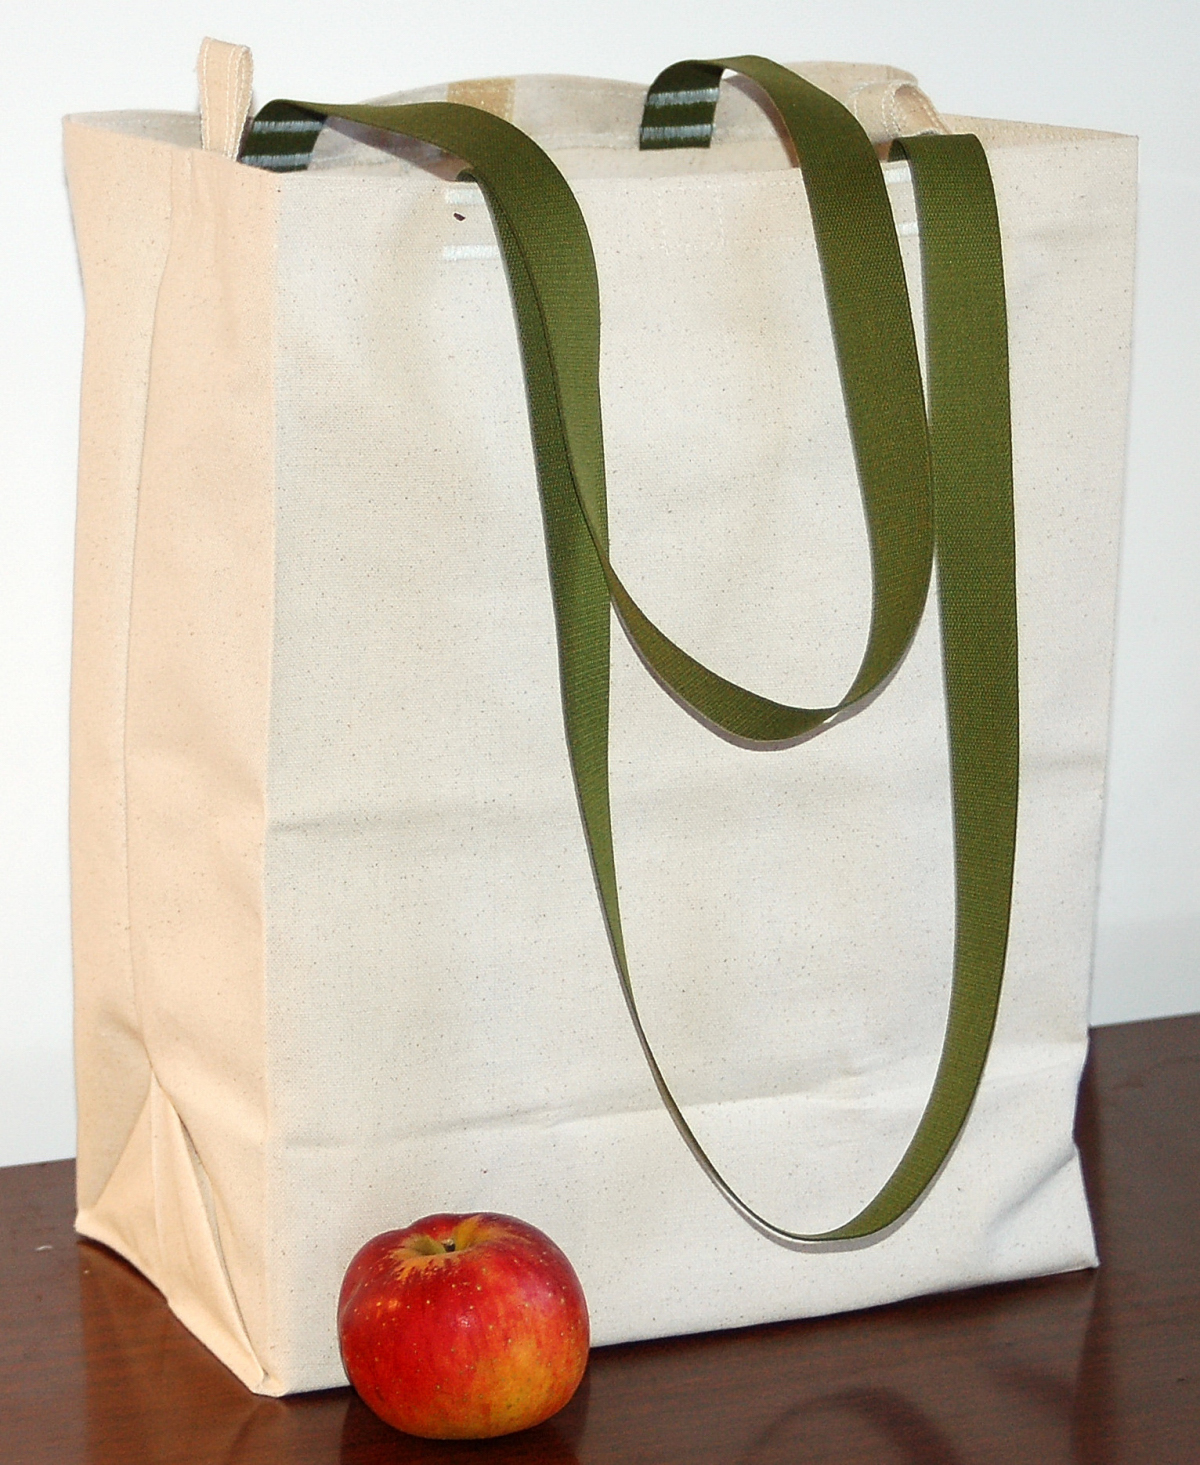 Turtlecreek USA Canvas Grocery Bags | Shopping Totes